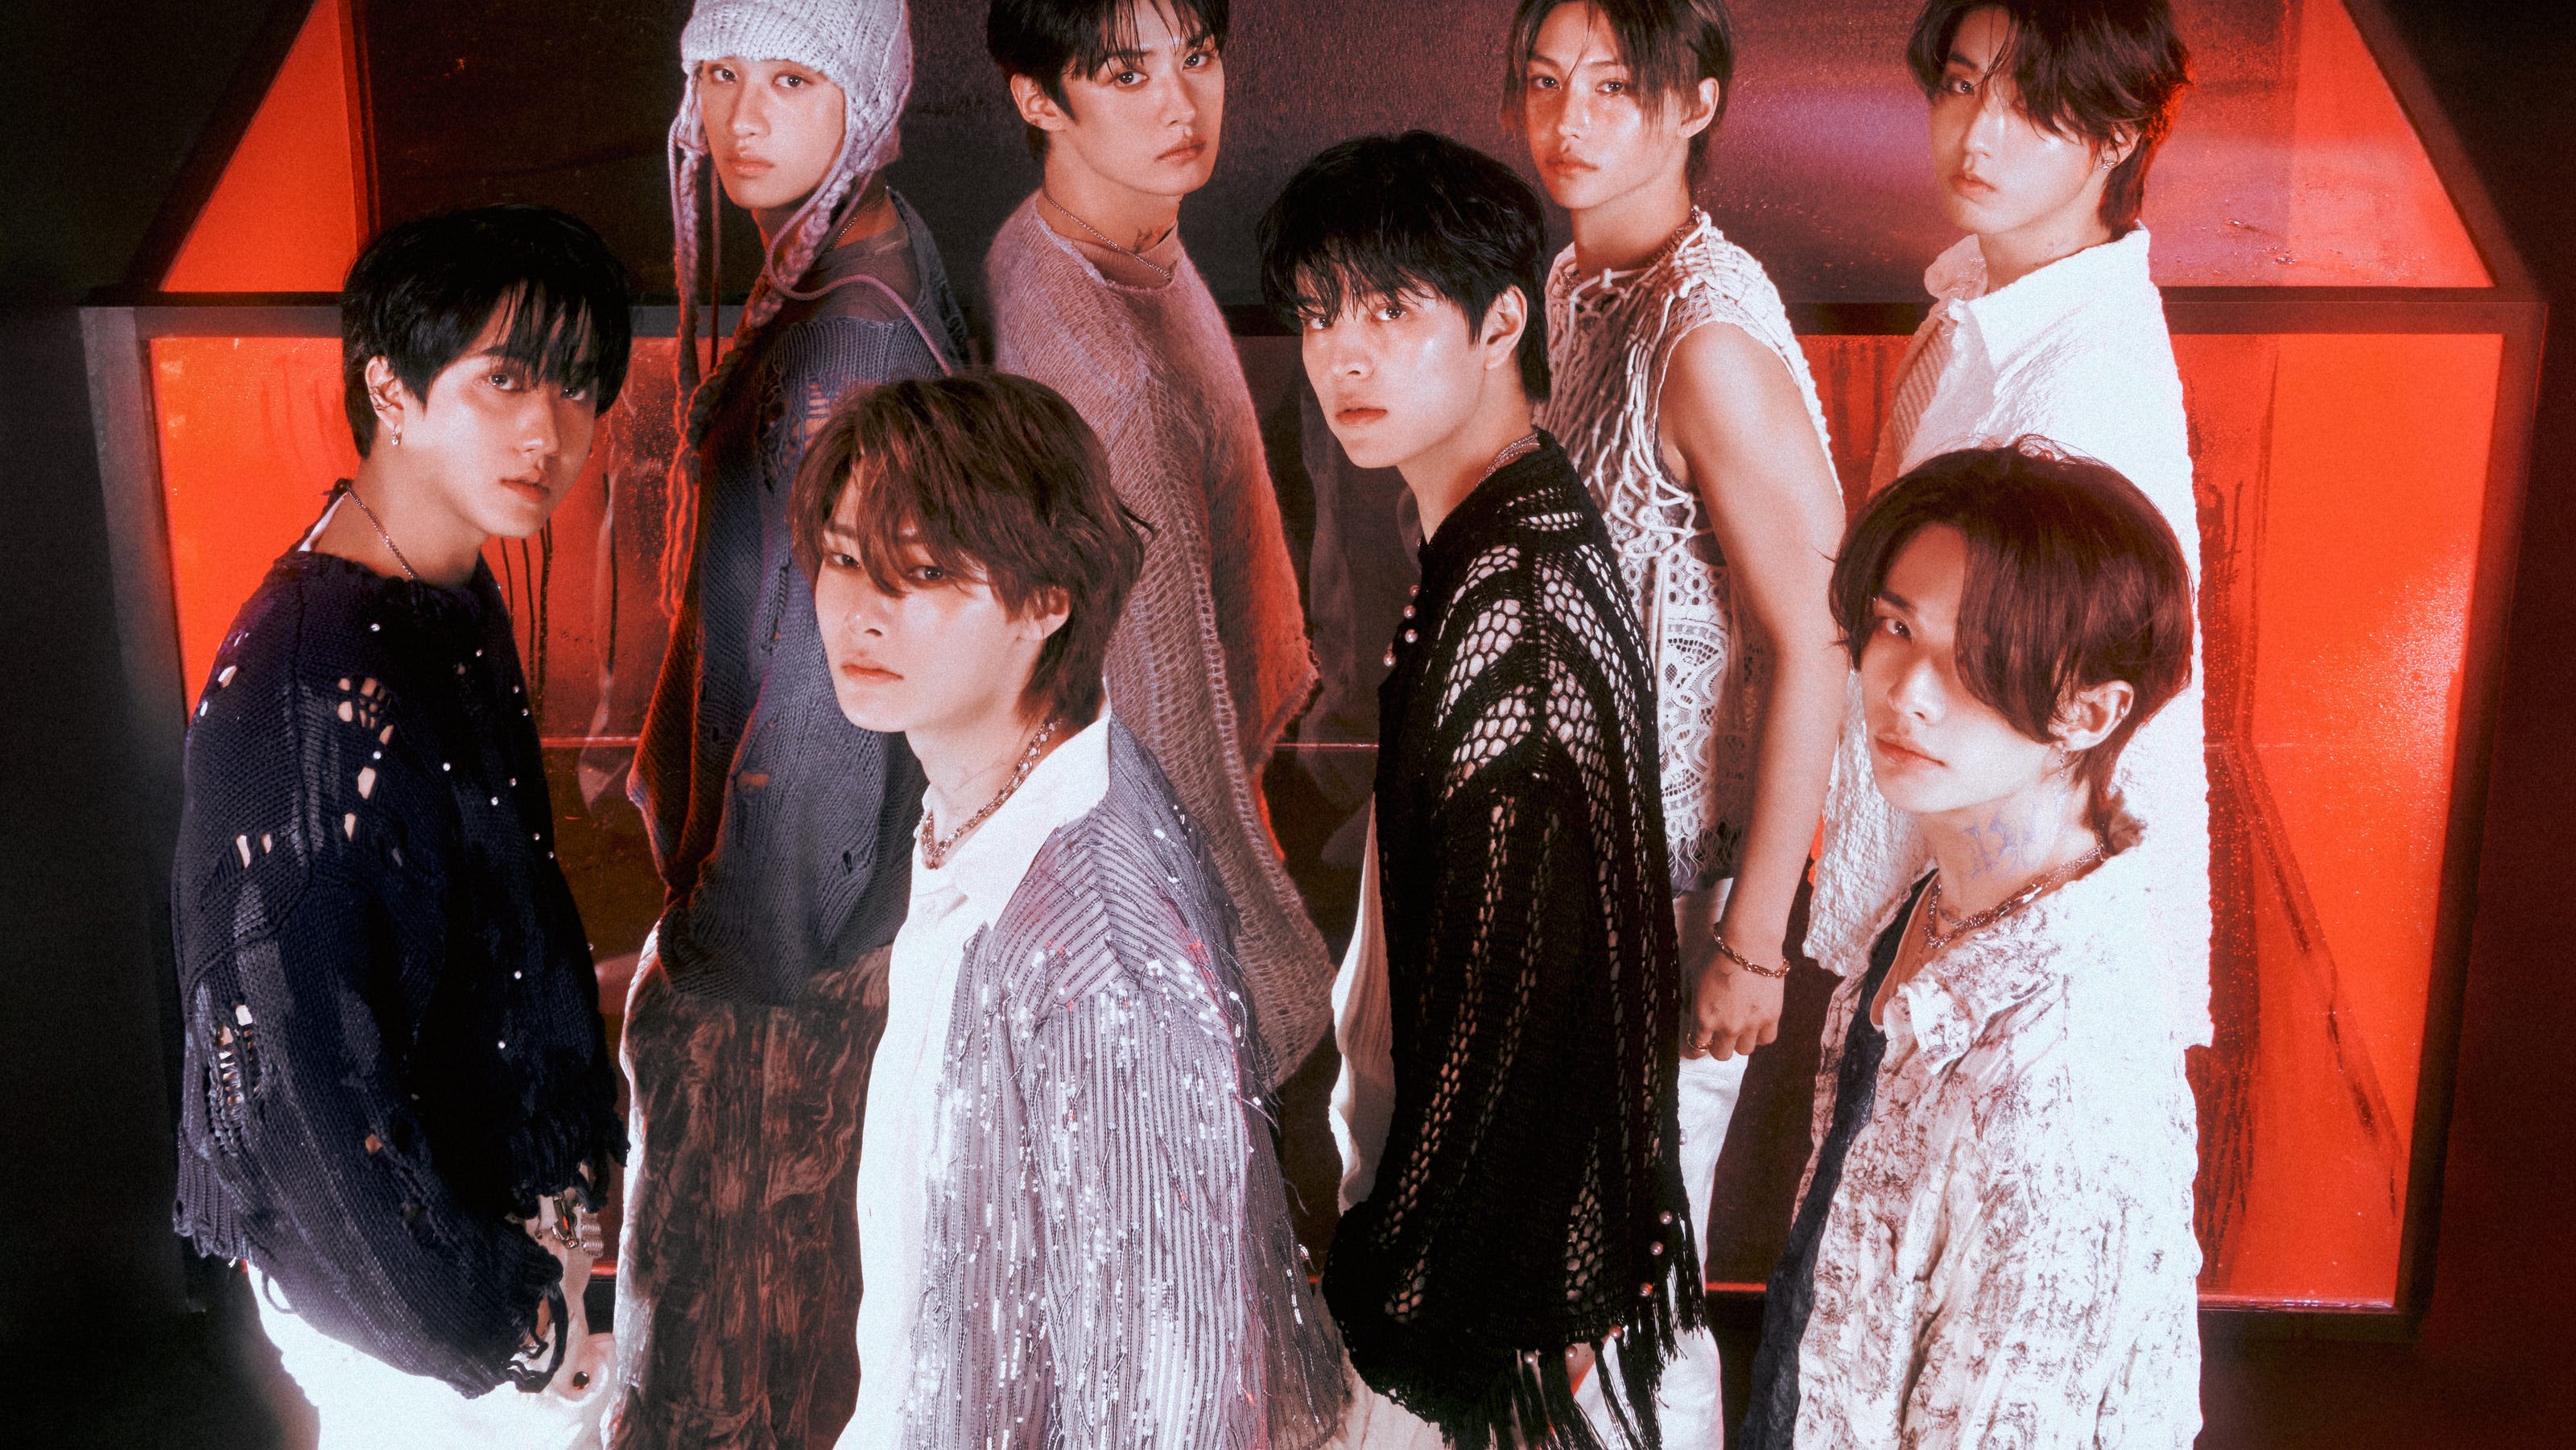 Stray Kids talk new music, Lollapalooza: 'We put in our souls and minds into the music'